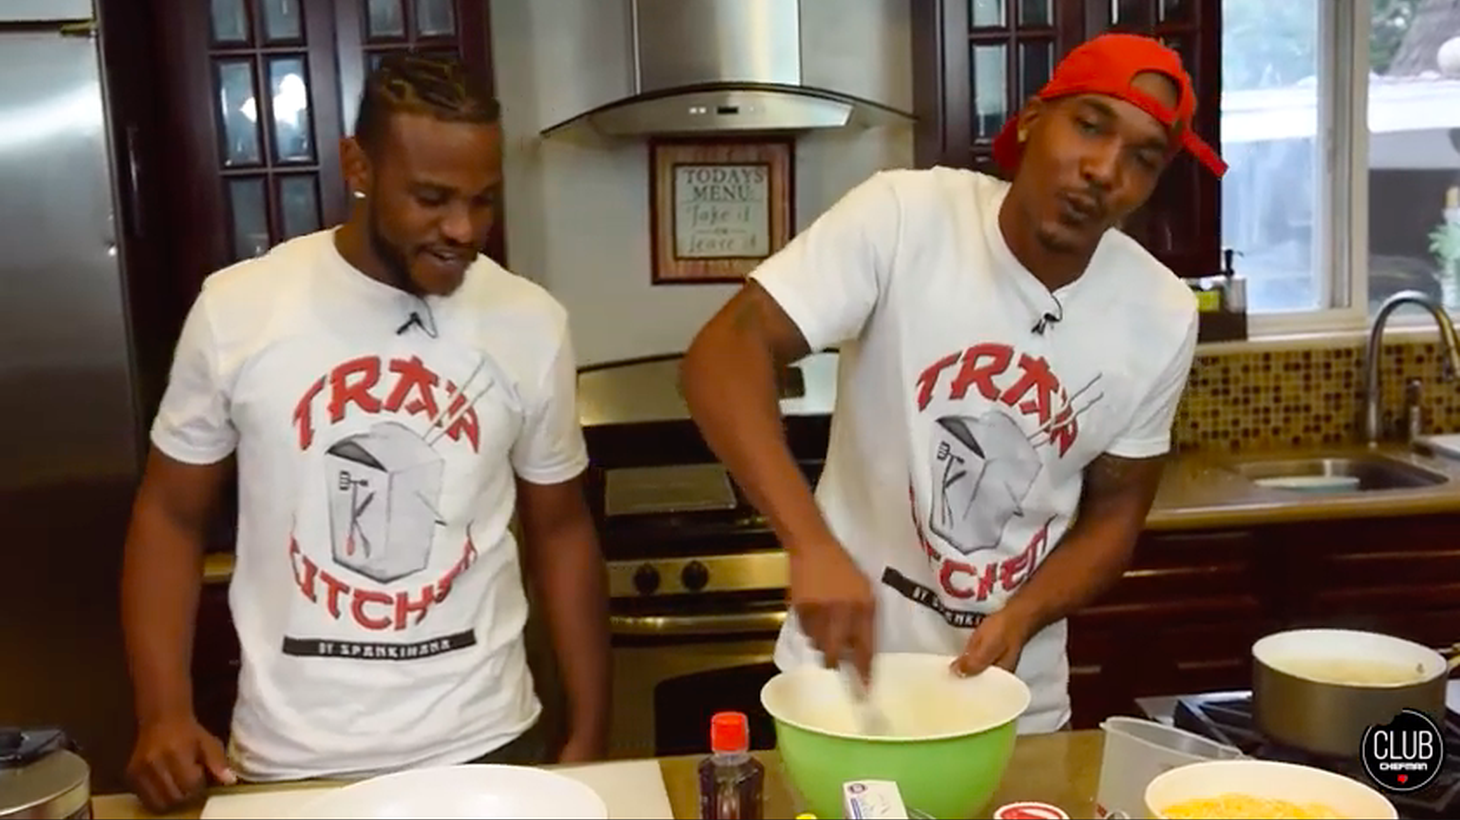 Malachi “Spank” Jenkins  and  Roberto “News” Smith, the men behind Trap Kitchen, are known for making soul food like mac and cheese and chicken and waffles.